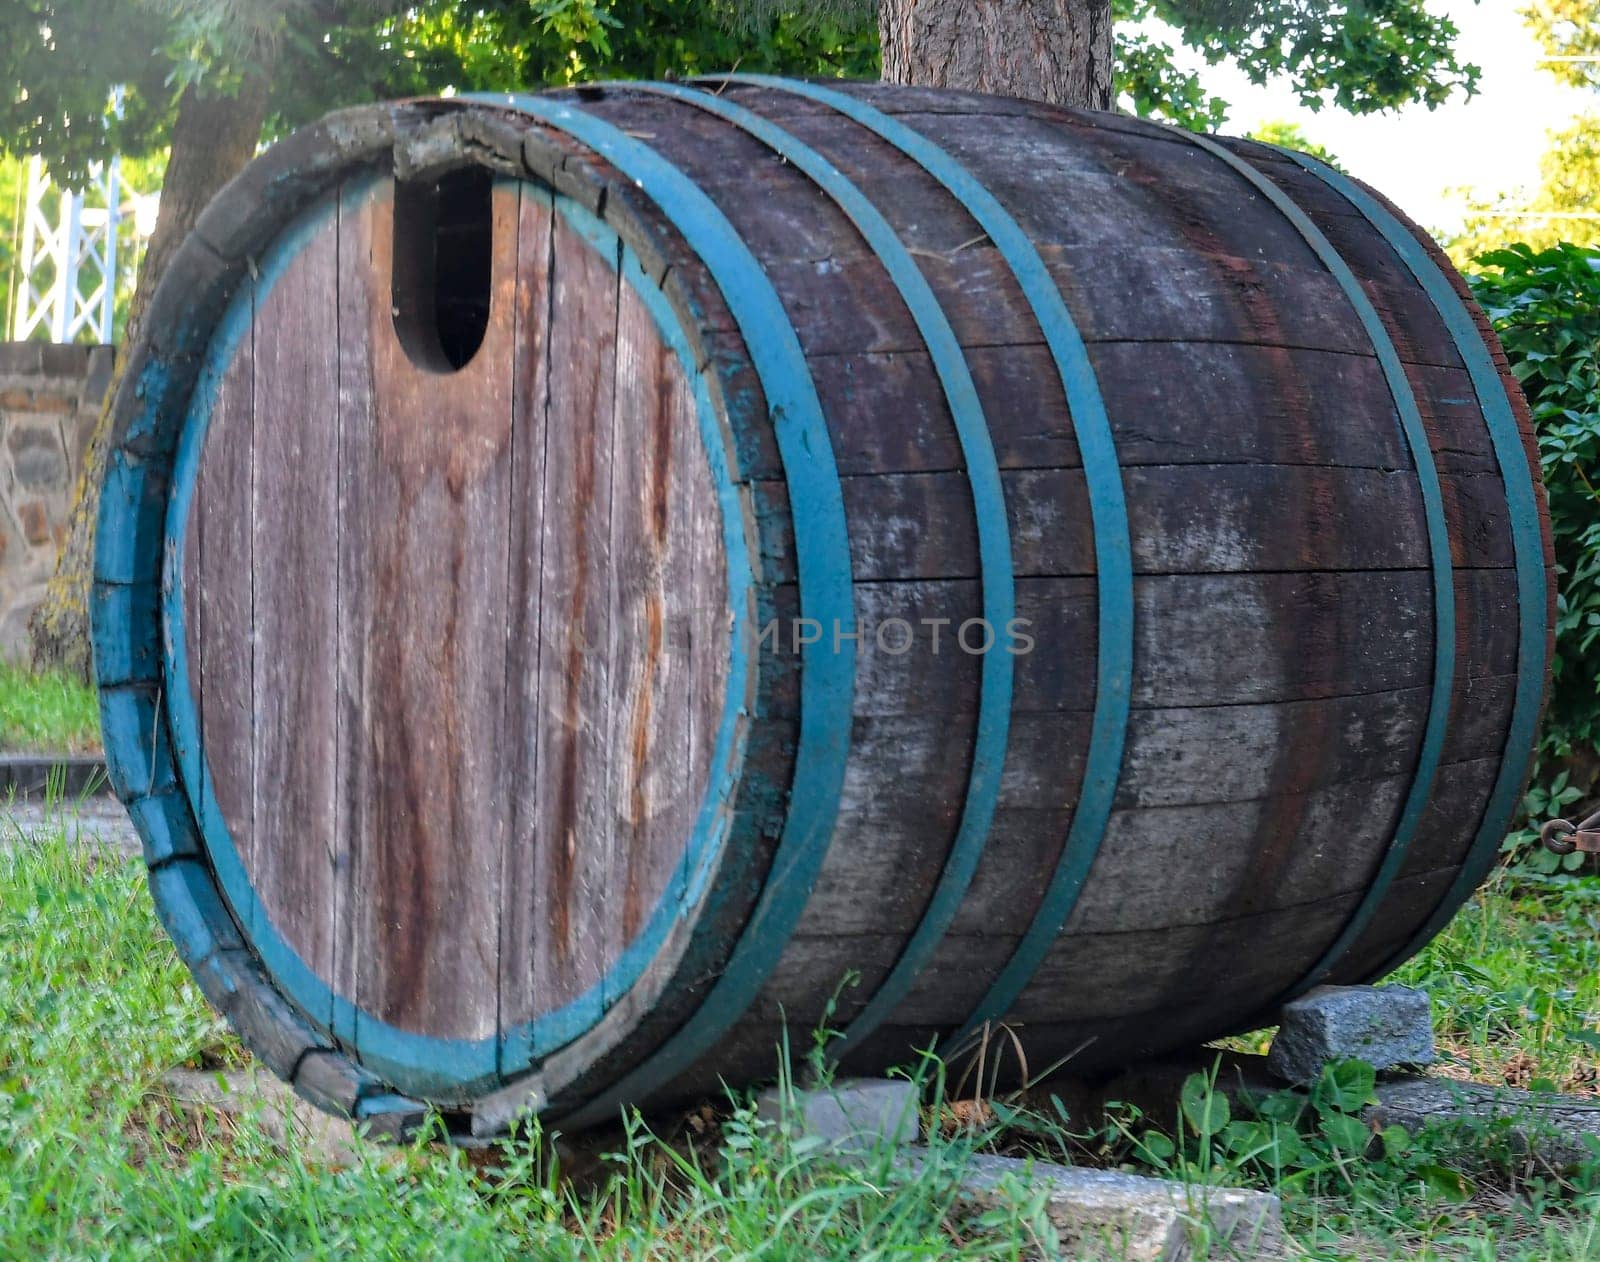 Retro concept of winemaking and the good old days. An old wine barrel in front of the wine cellar. The concept of winemaking and organic winemaking. Sustainable winery concept by roman_nerud